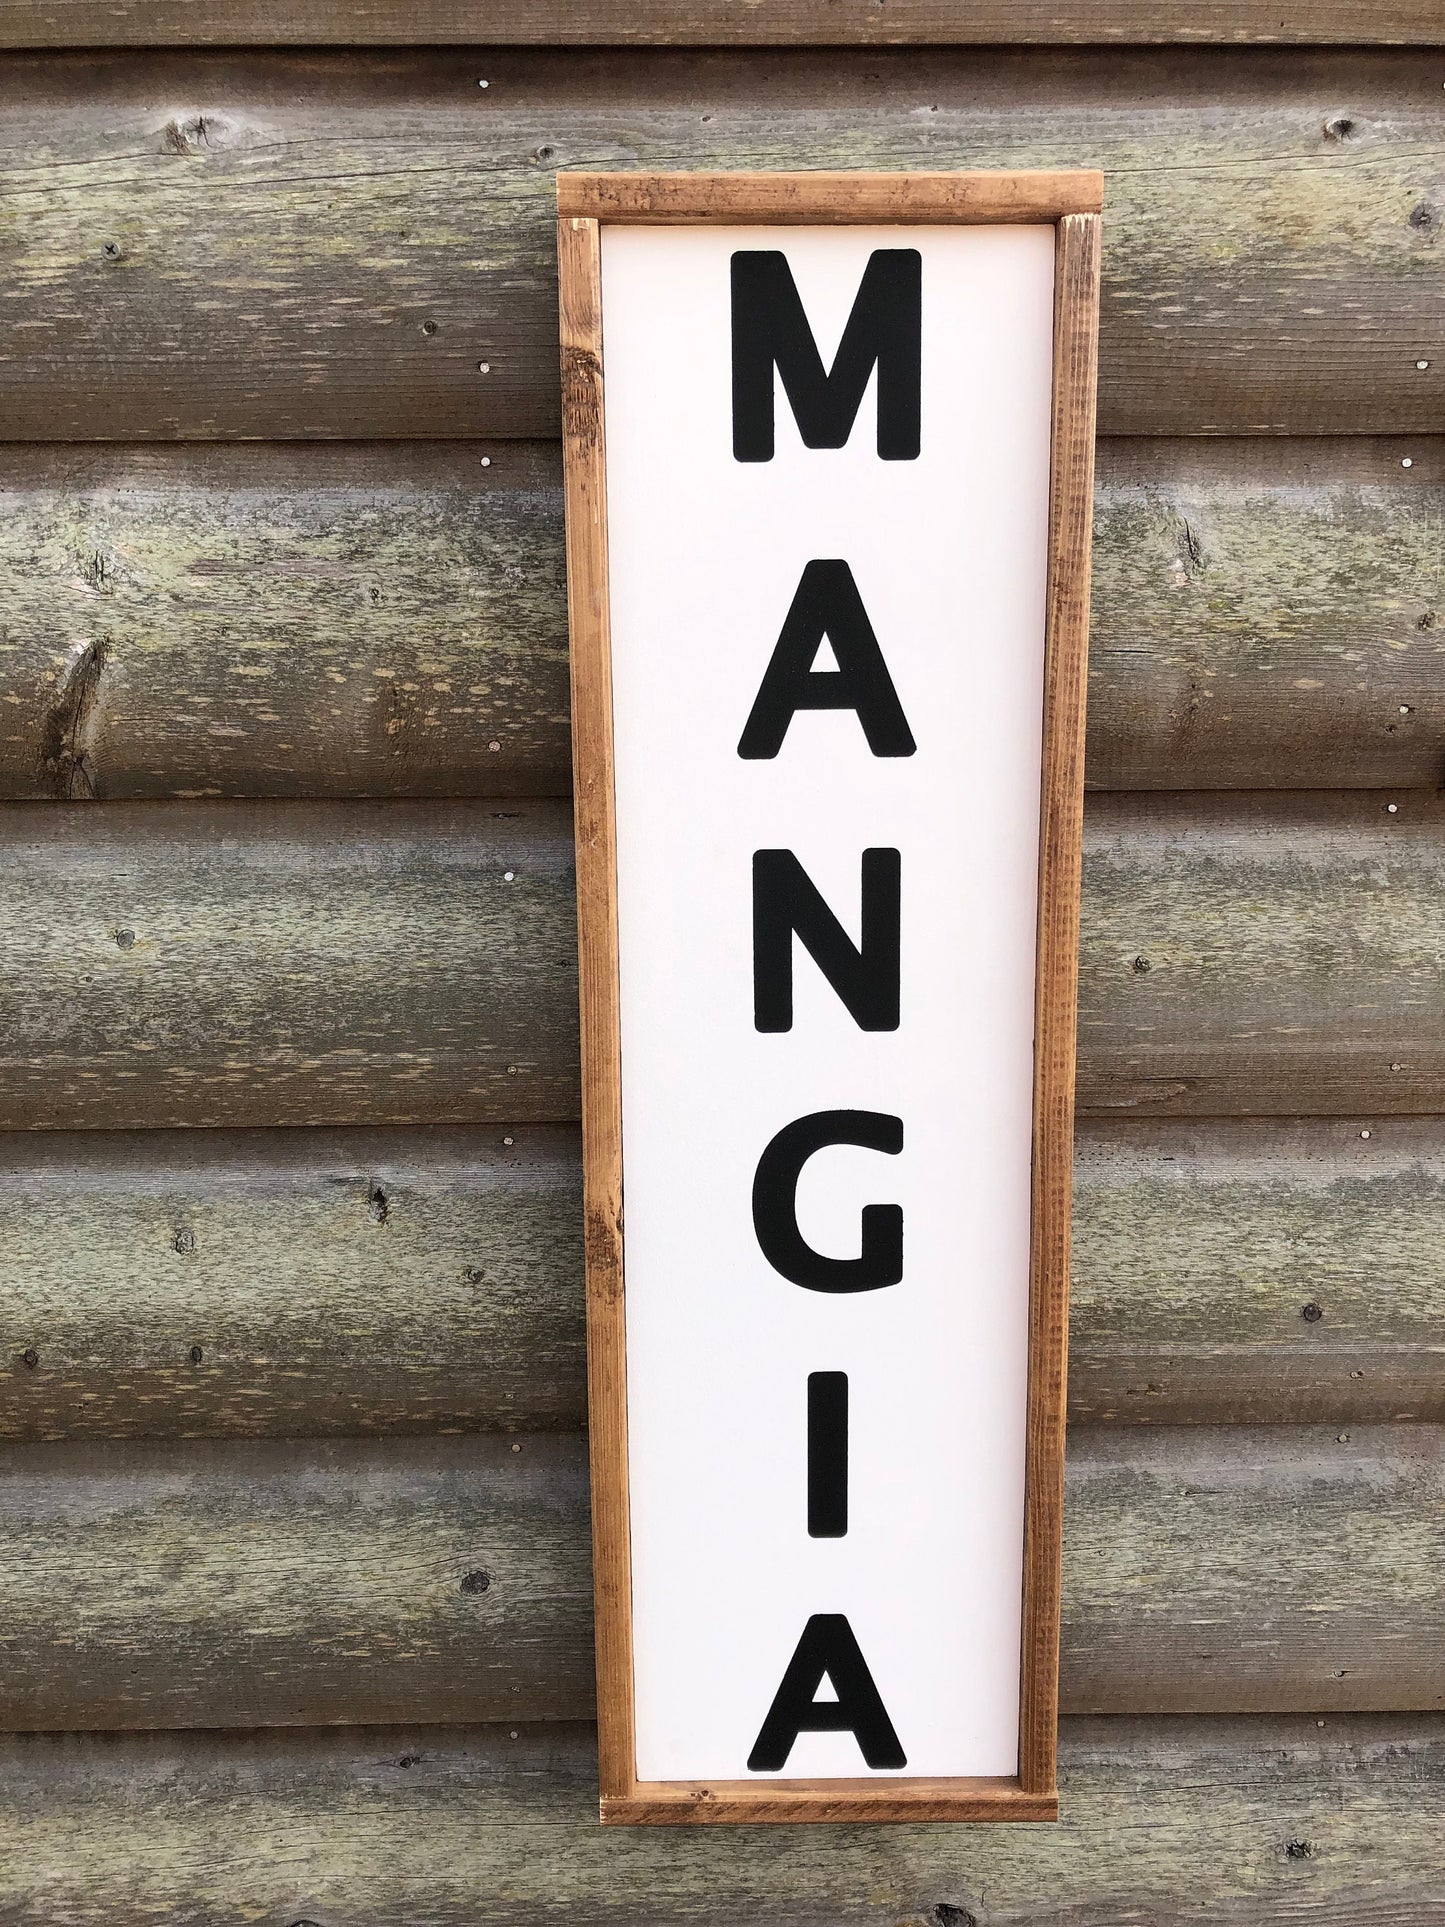 Mangia Eat Ethnic Farmhouse Rustic Wall Decor Hand painted Sign